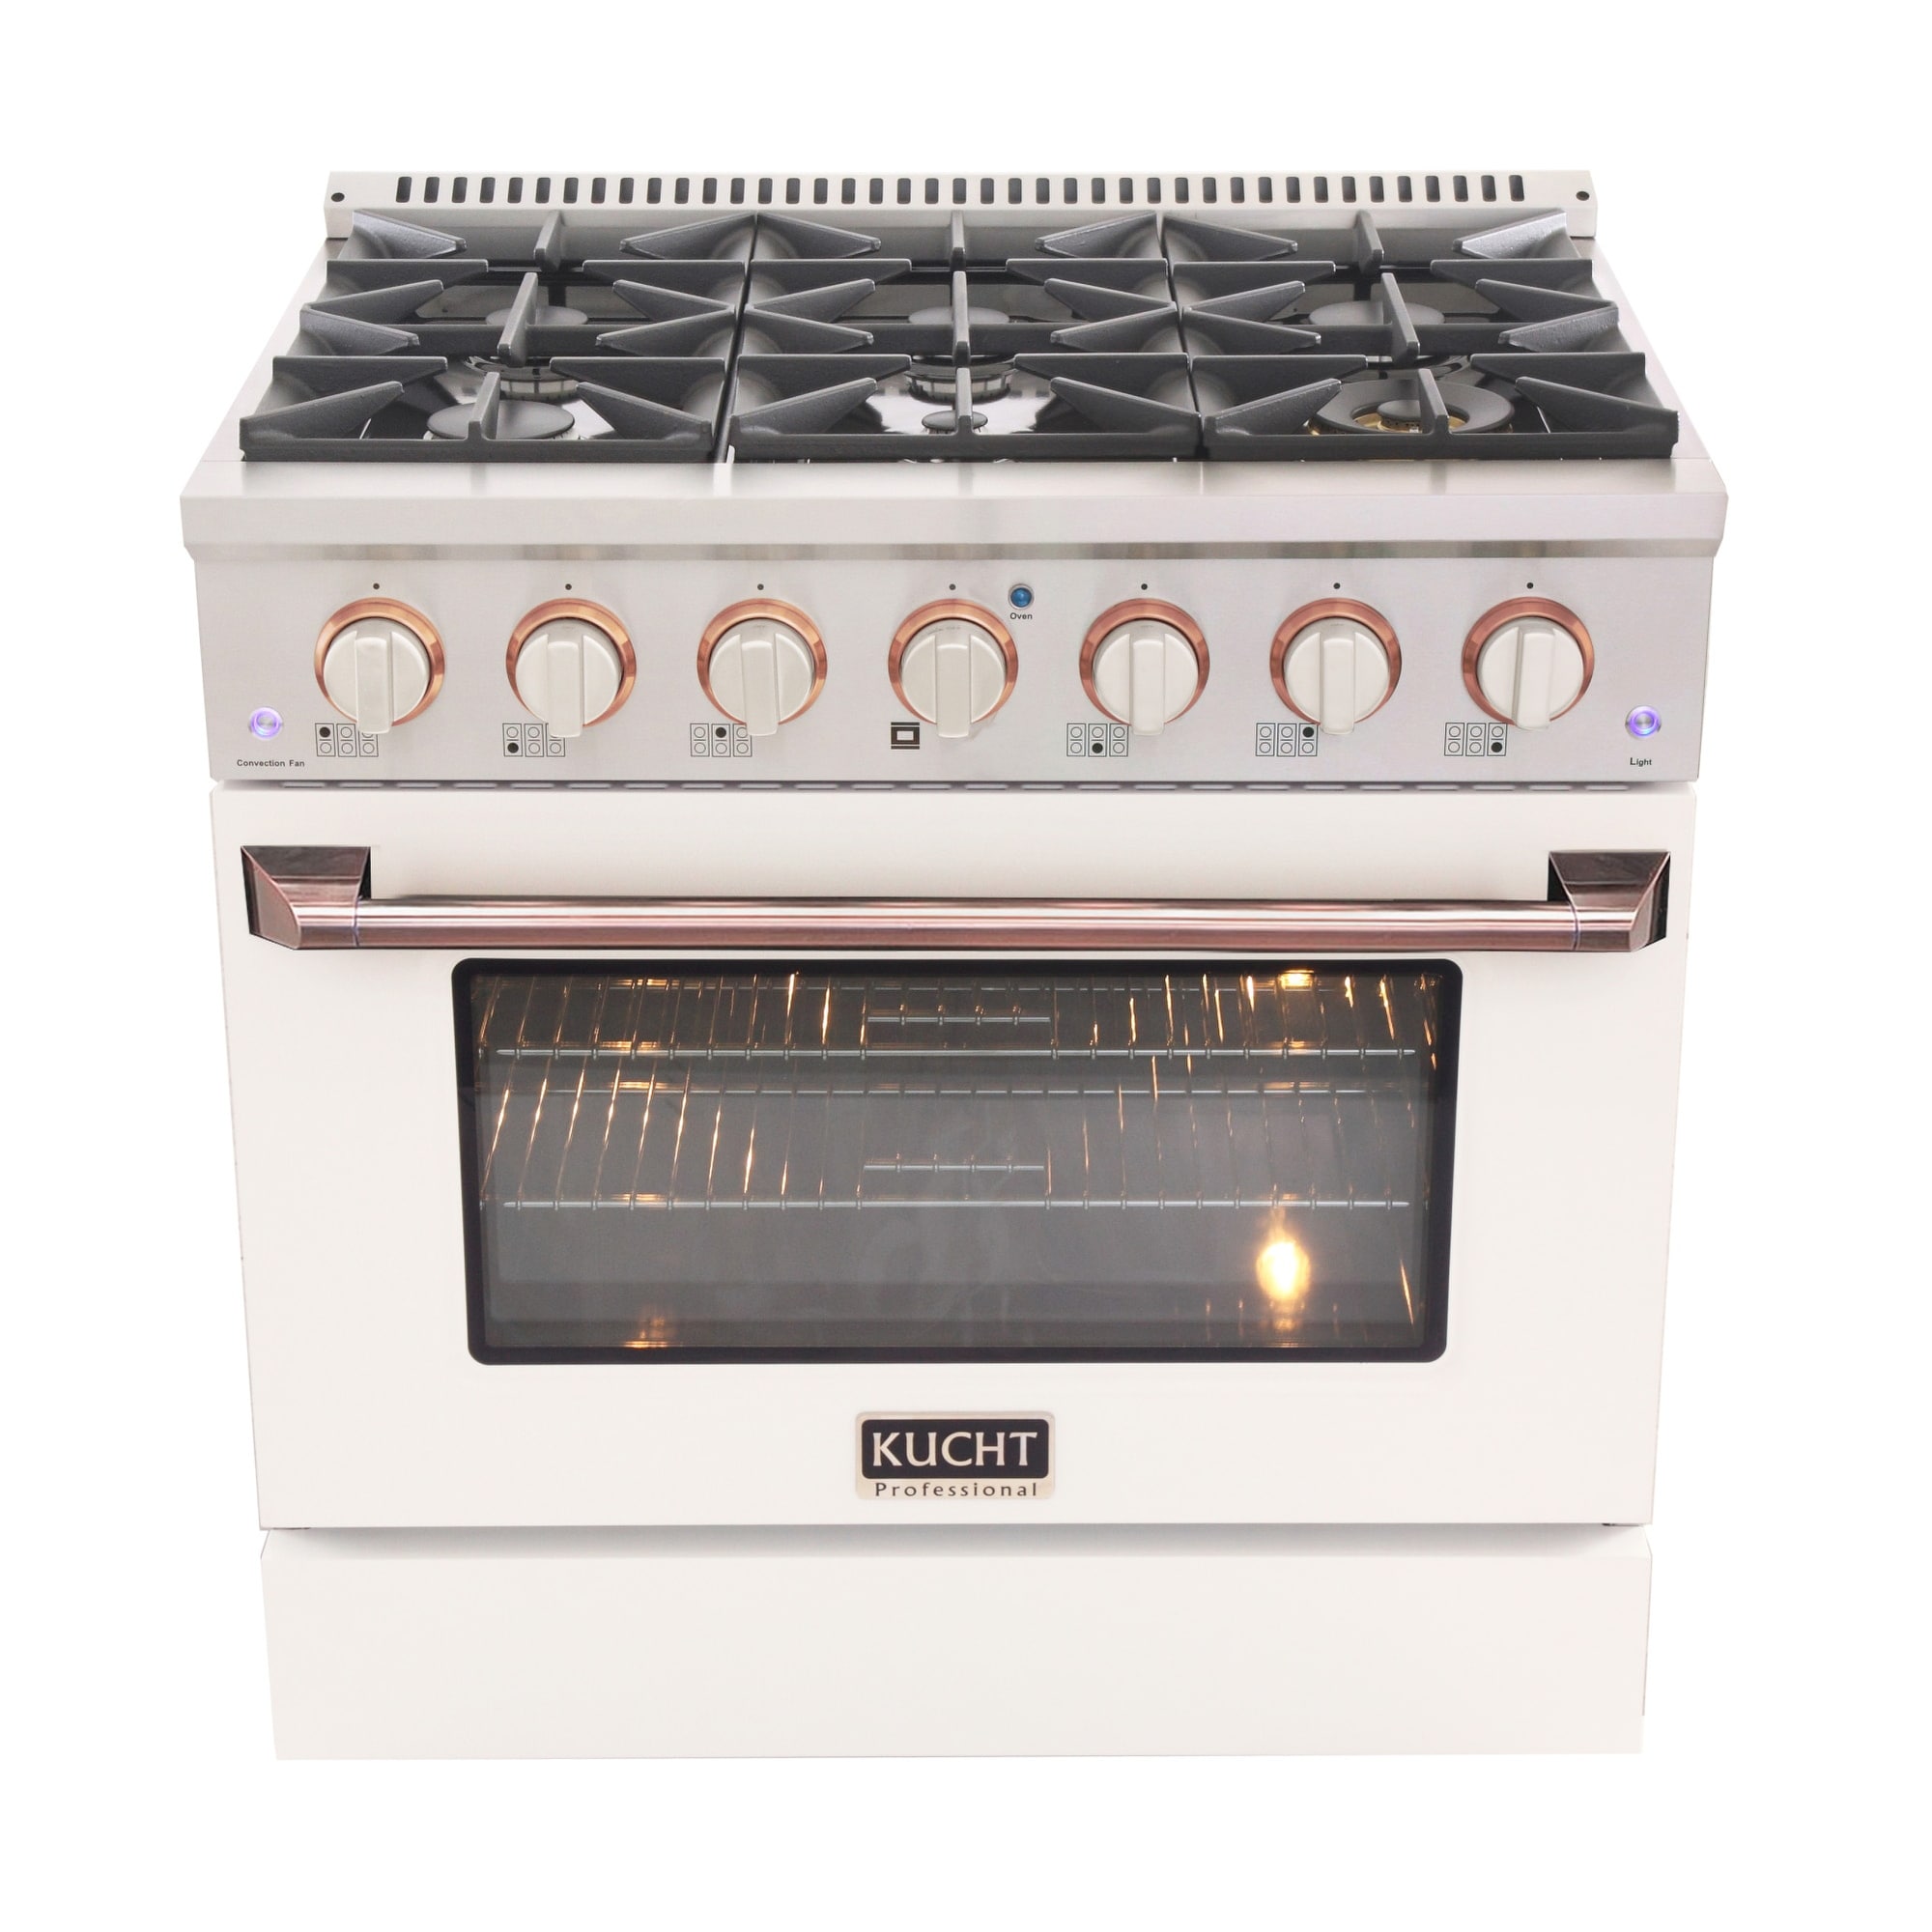 KUCHT Professional 36 in. 5.2 cu. ft. Liquid Propane Range with Sealed Burners and Convection Oven in SS with customized colors